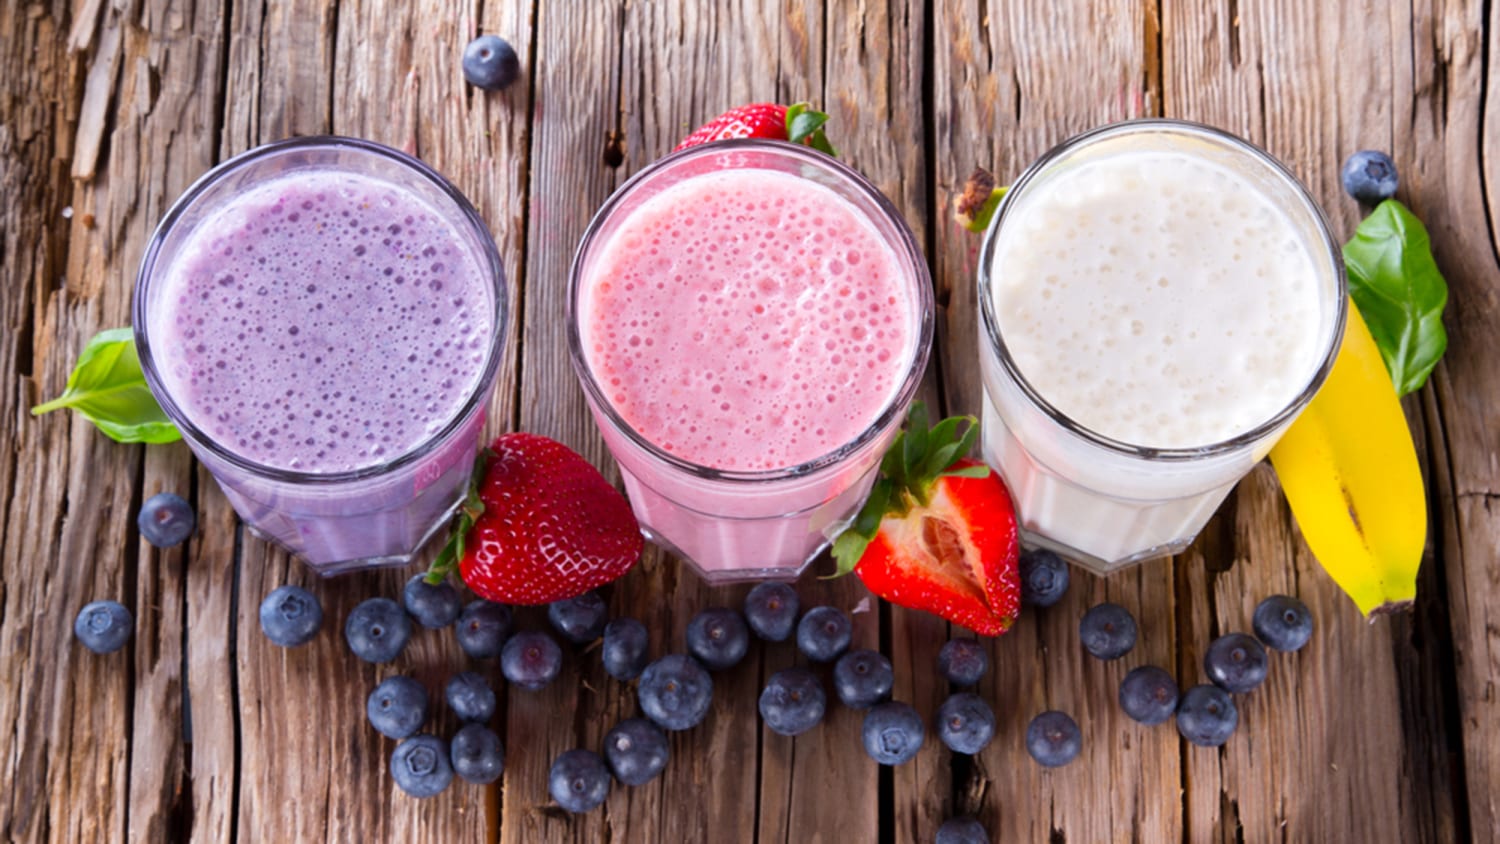 Super breakfast smoothies help make back-to-school a breeze - TODAY.com